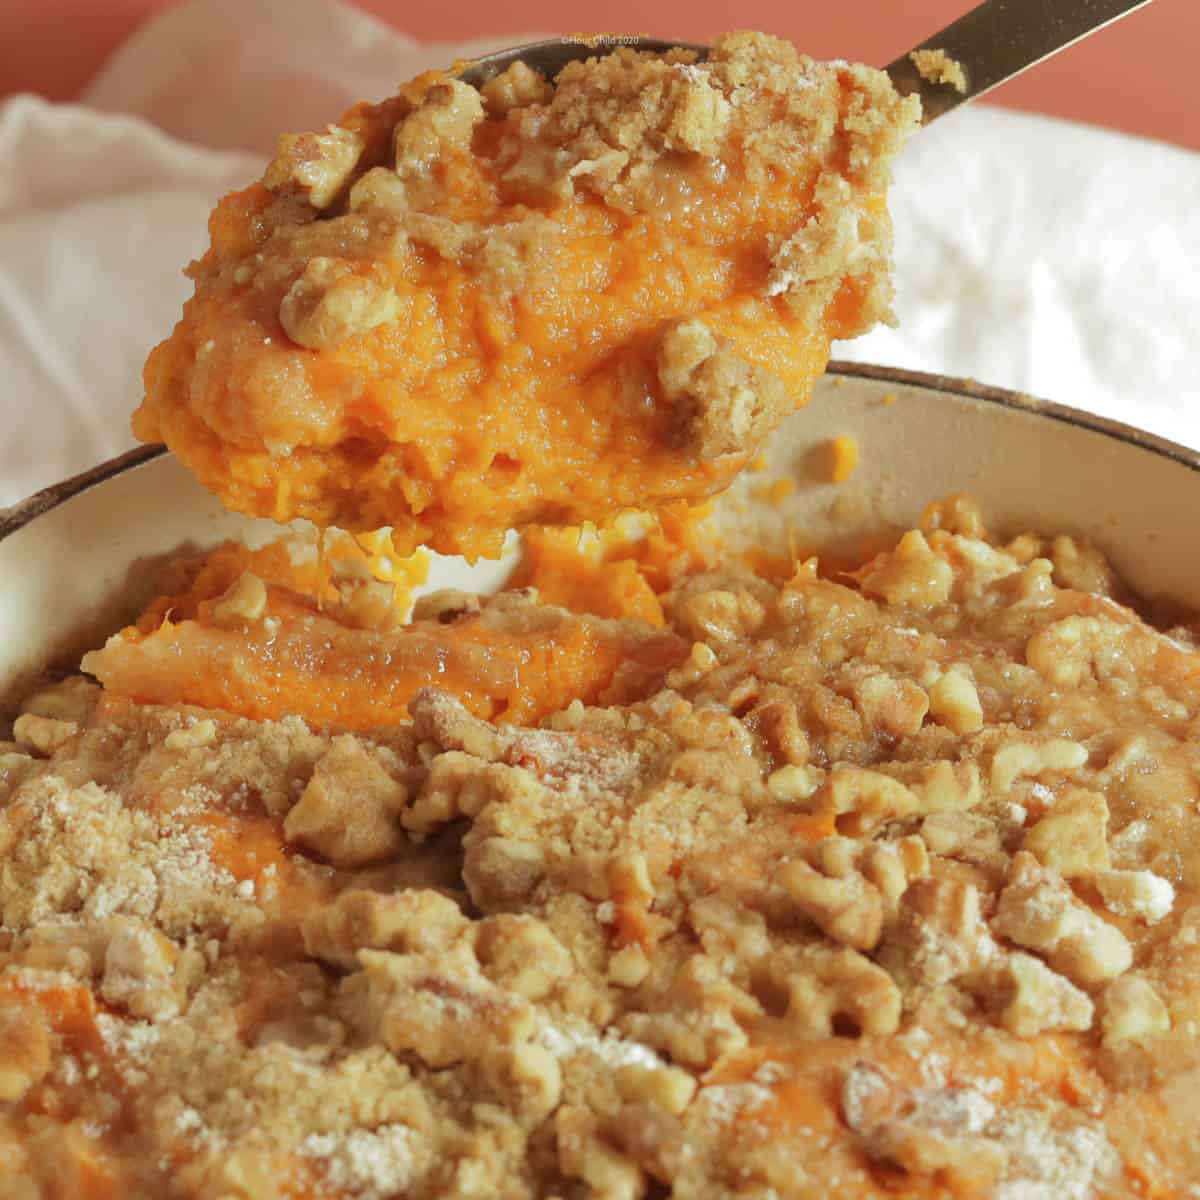 sweet potato casserole with pecan topping in a white cast iron casserole dish, with a large spoon lifting out a serving.